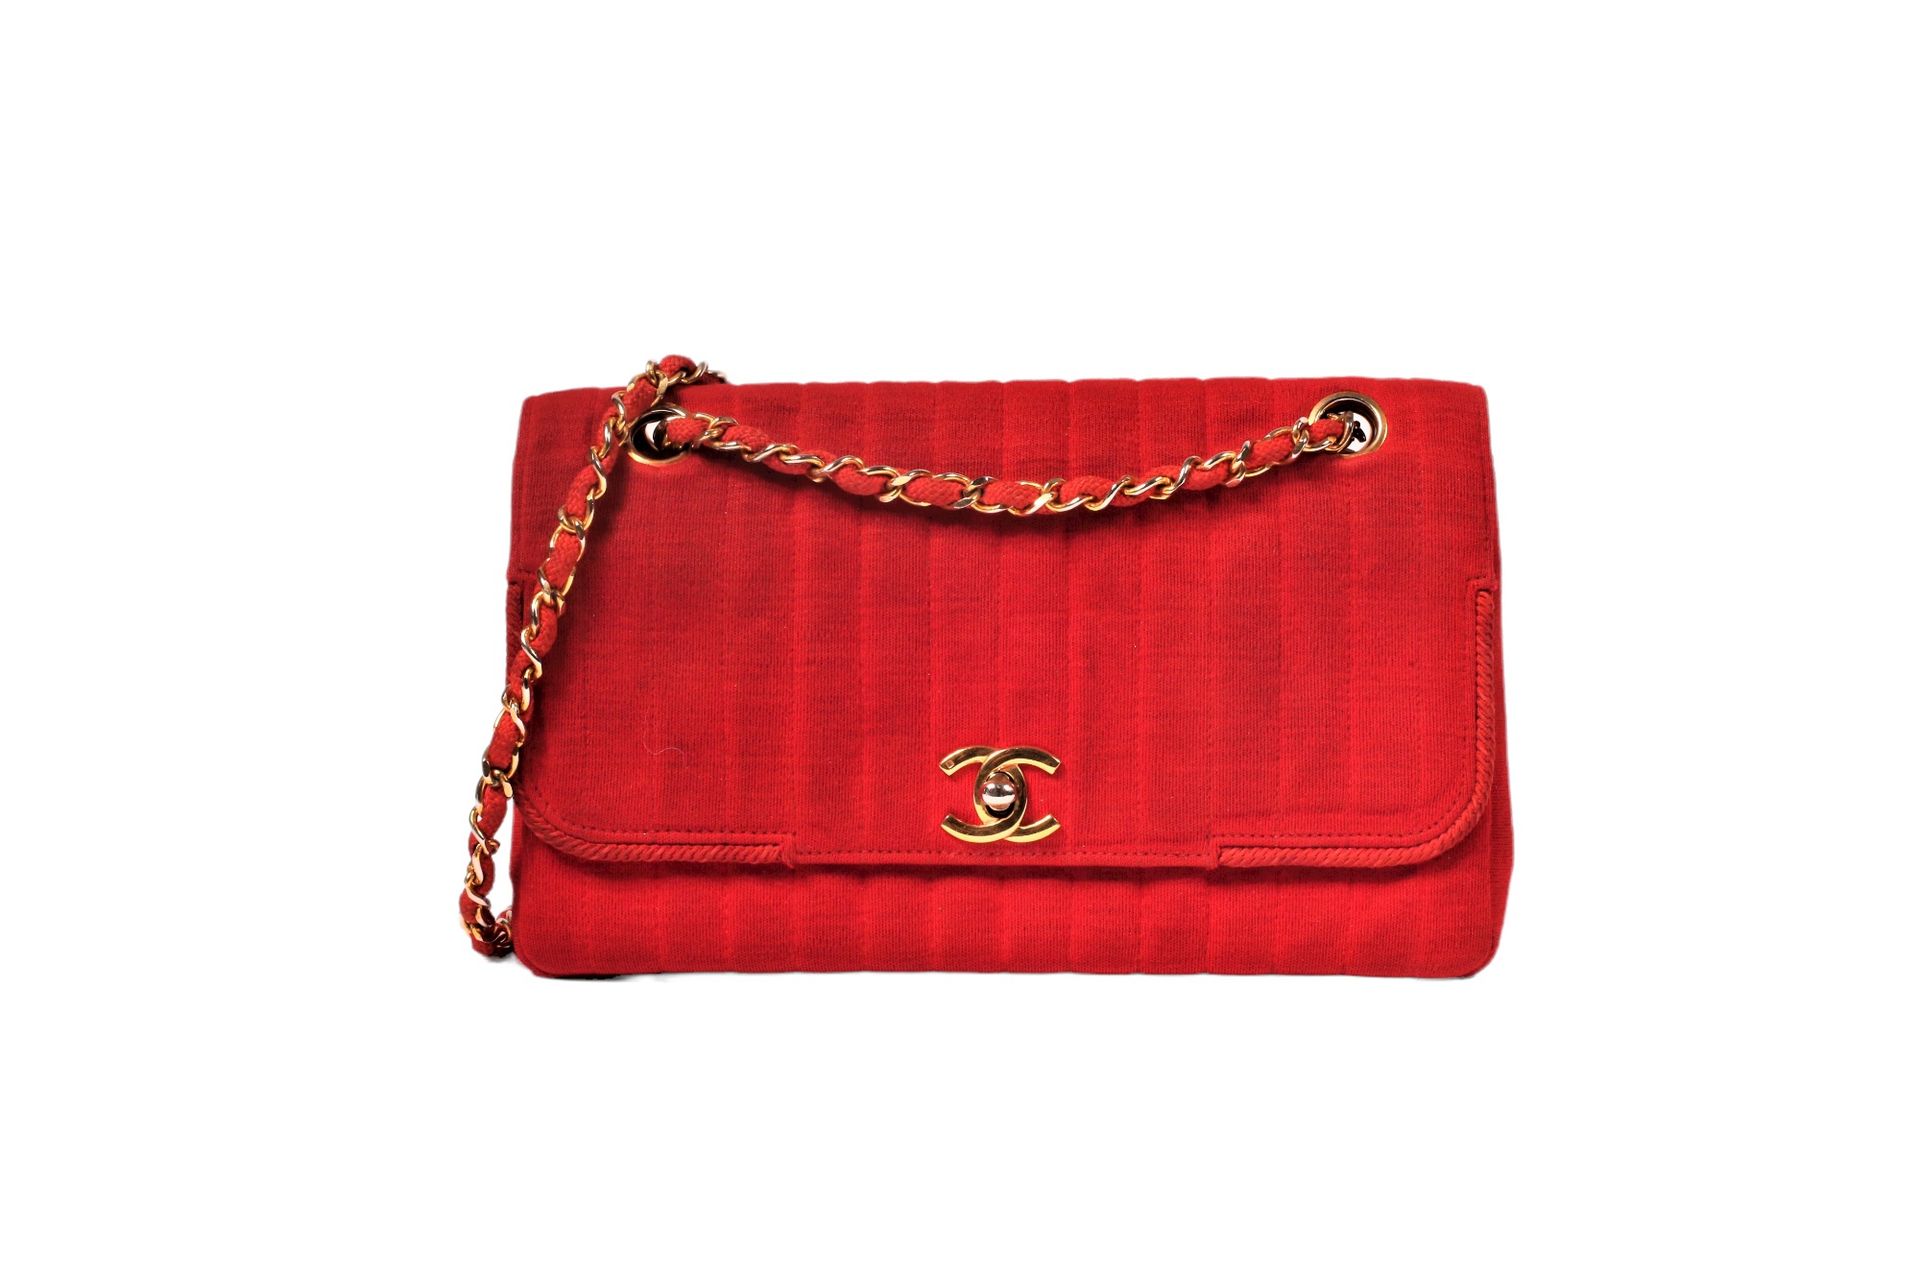 CHANEL Circa 80 - 85 Flap bag in red wool jersey, g…